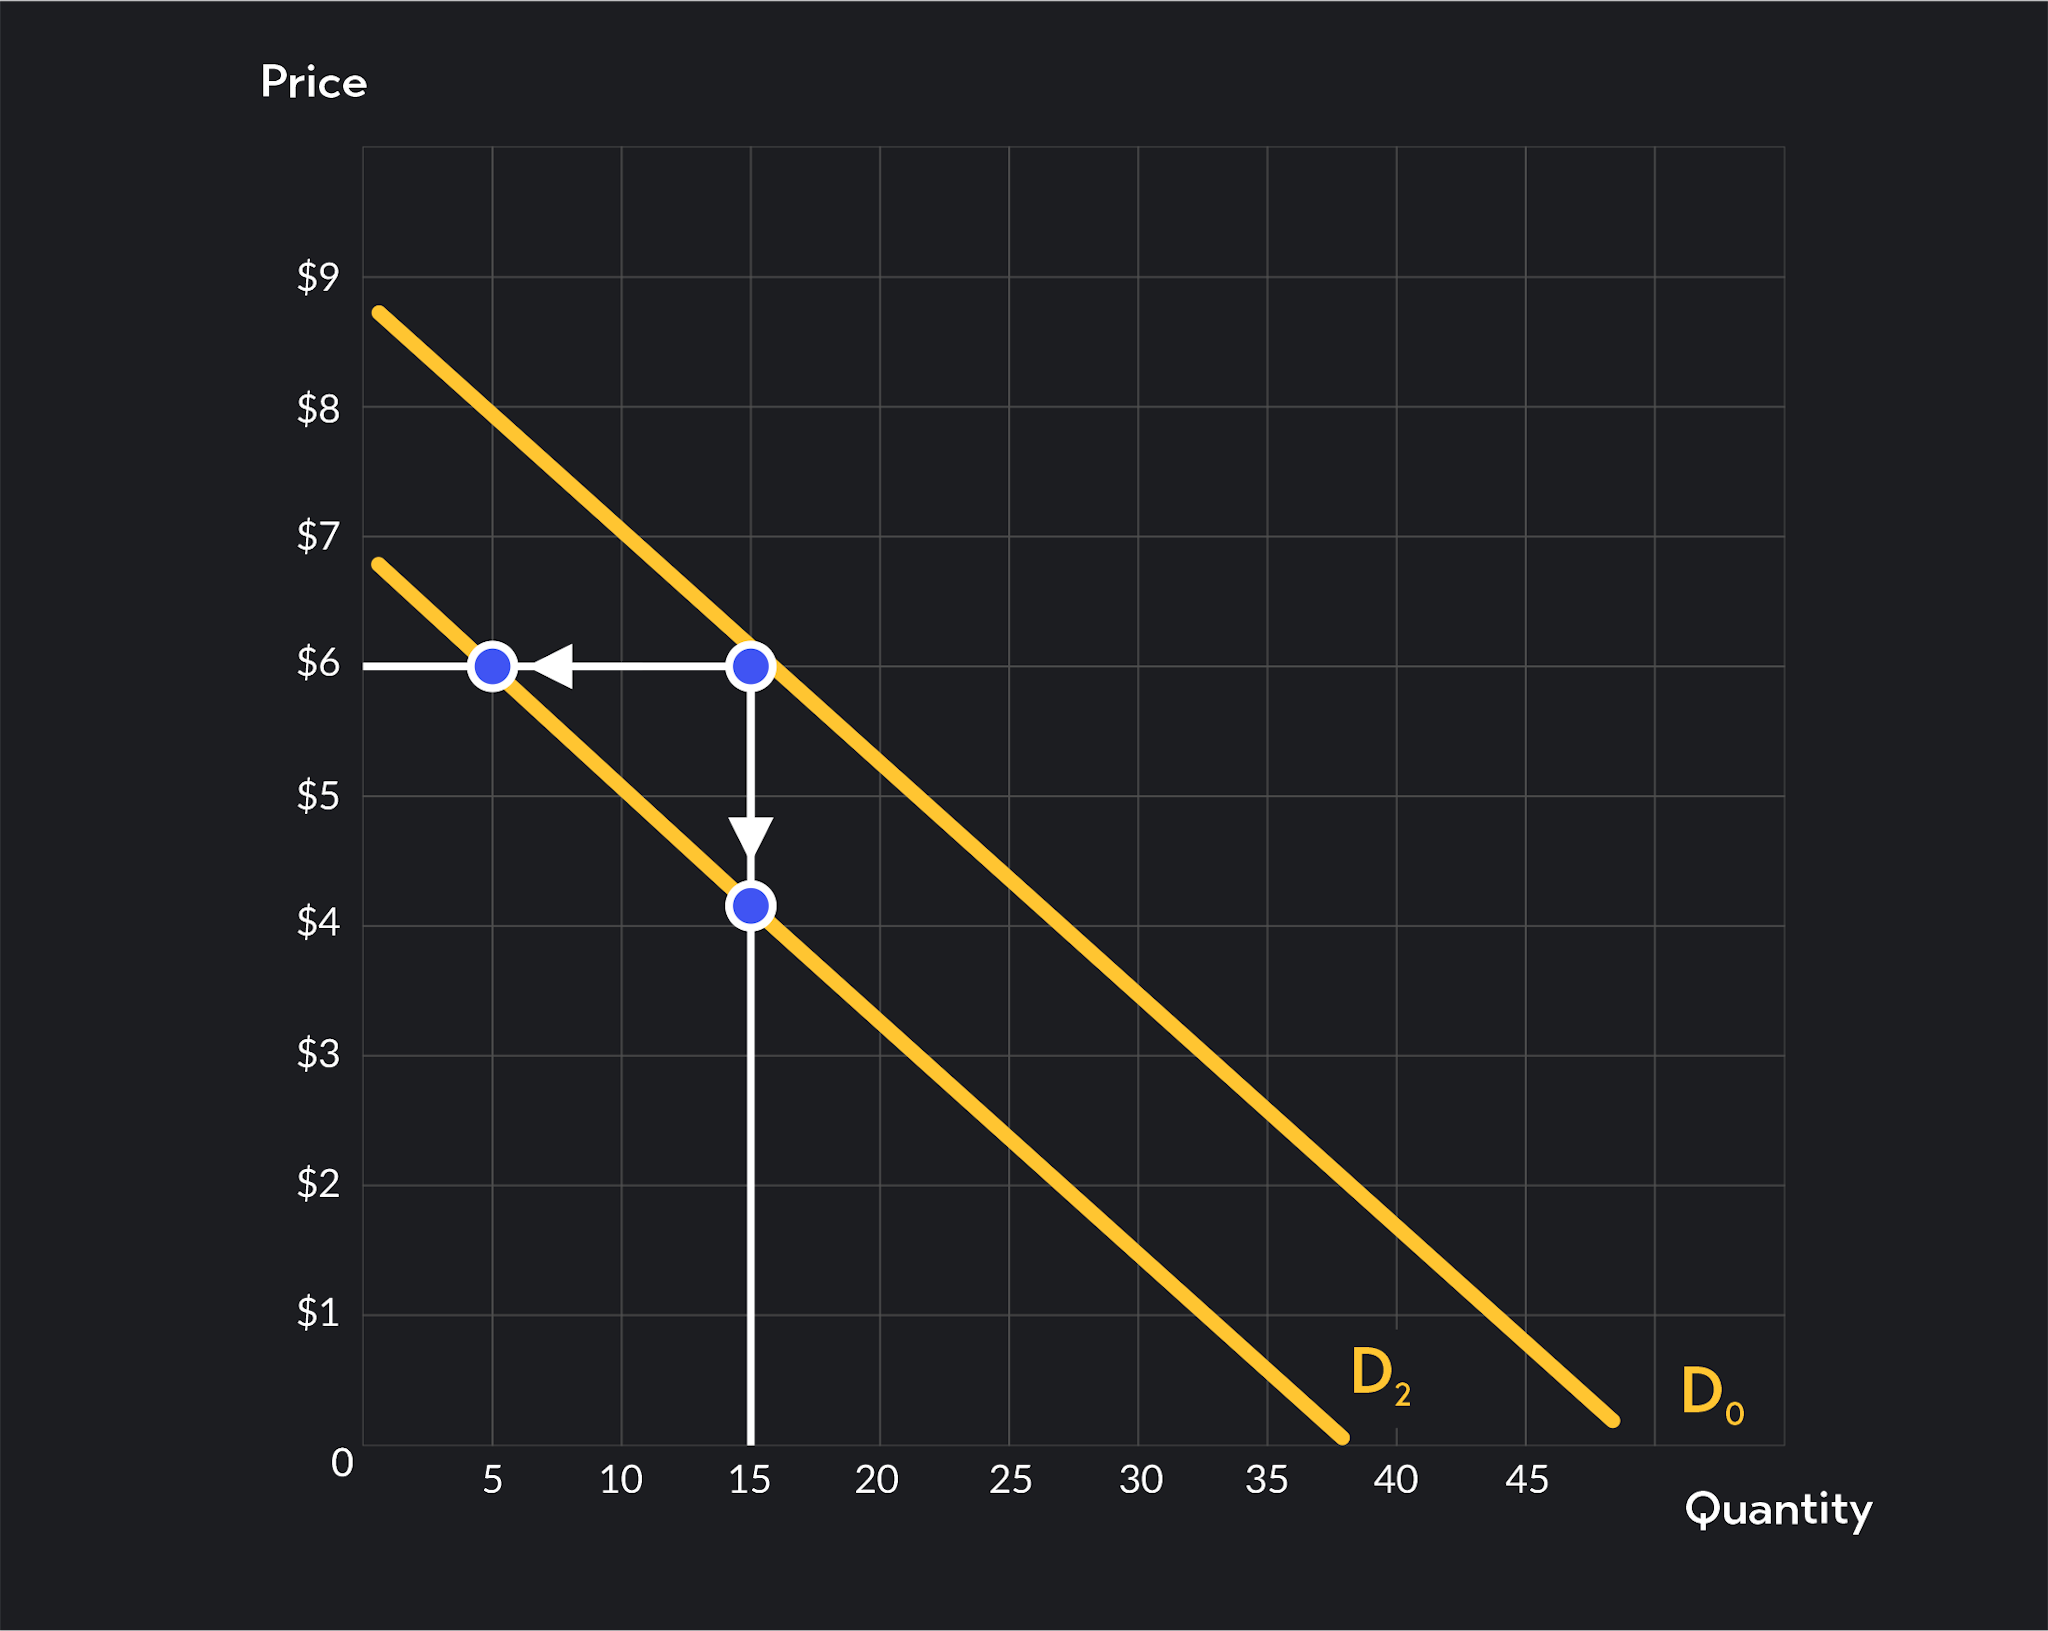 The demand curve shift to the left. At any given price, the quantity demanded has decreased. 